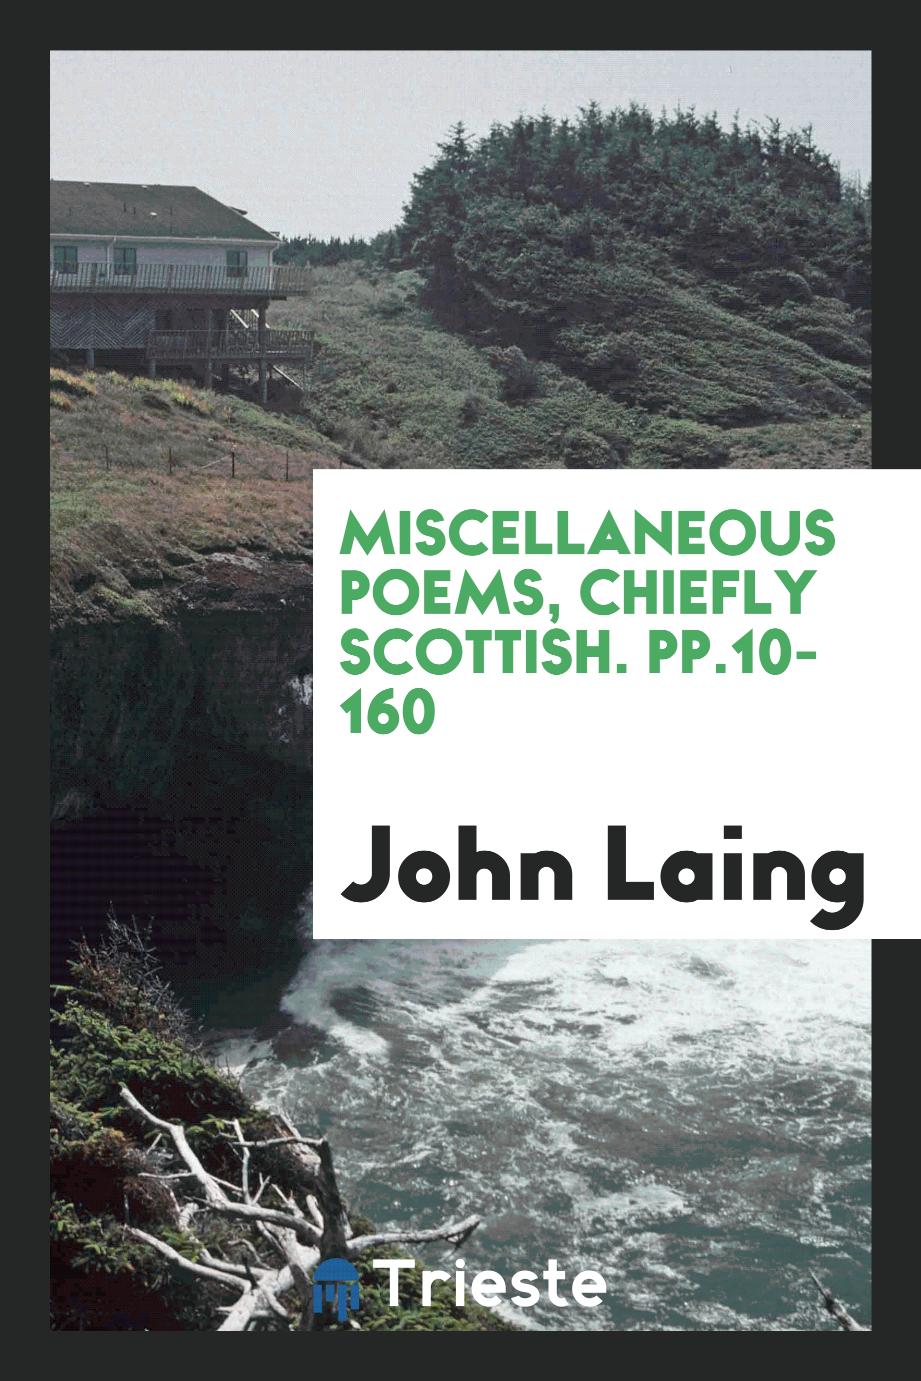 Miscellaneous Poems, Chiefly Scottish. pp.10-160